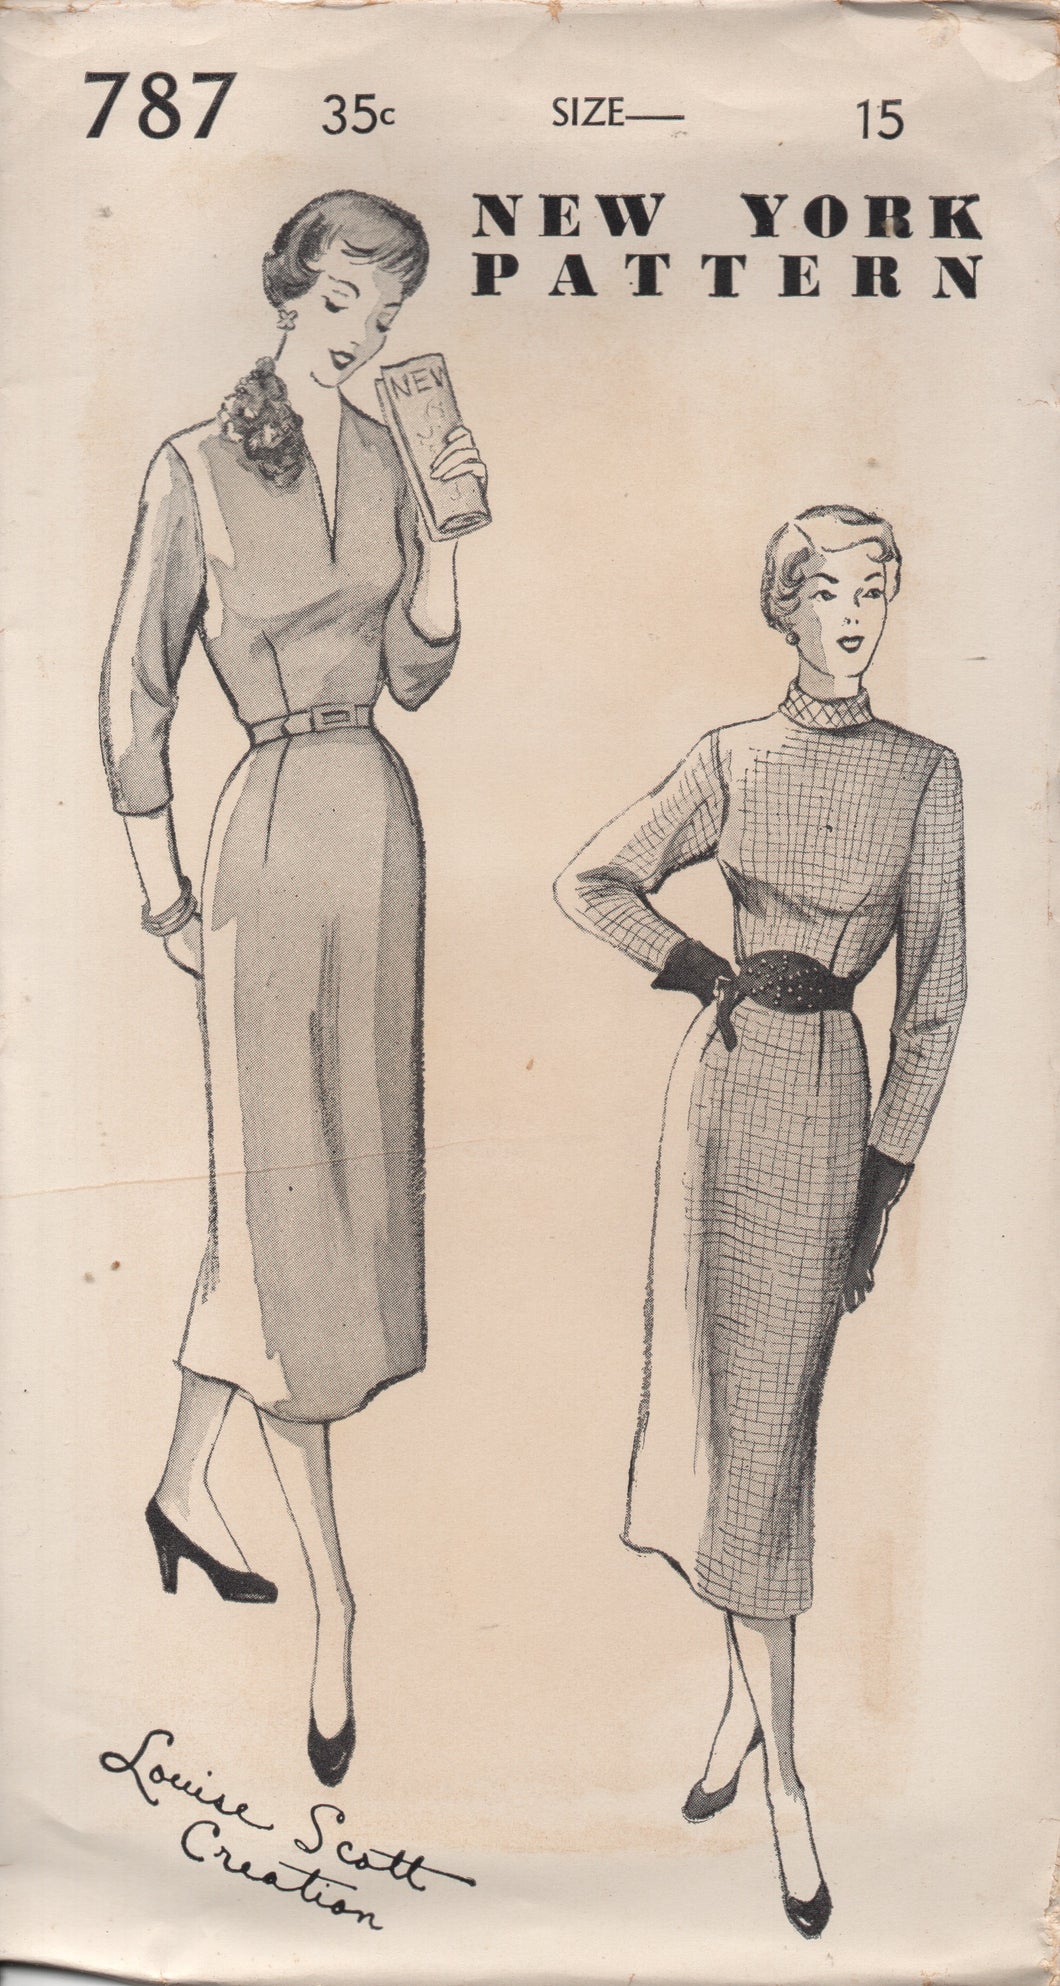 1950's New York Slim Fit Sheath Dress with V Neck or Mandarin Collar and Belt - Bust 33